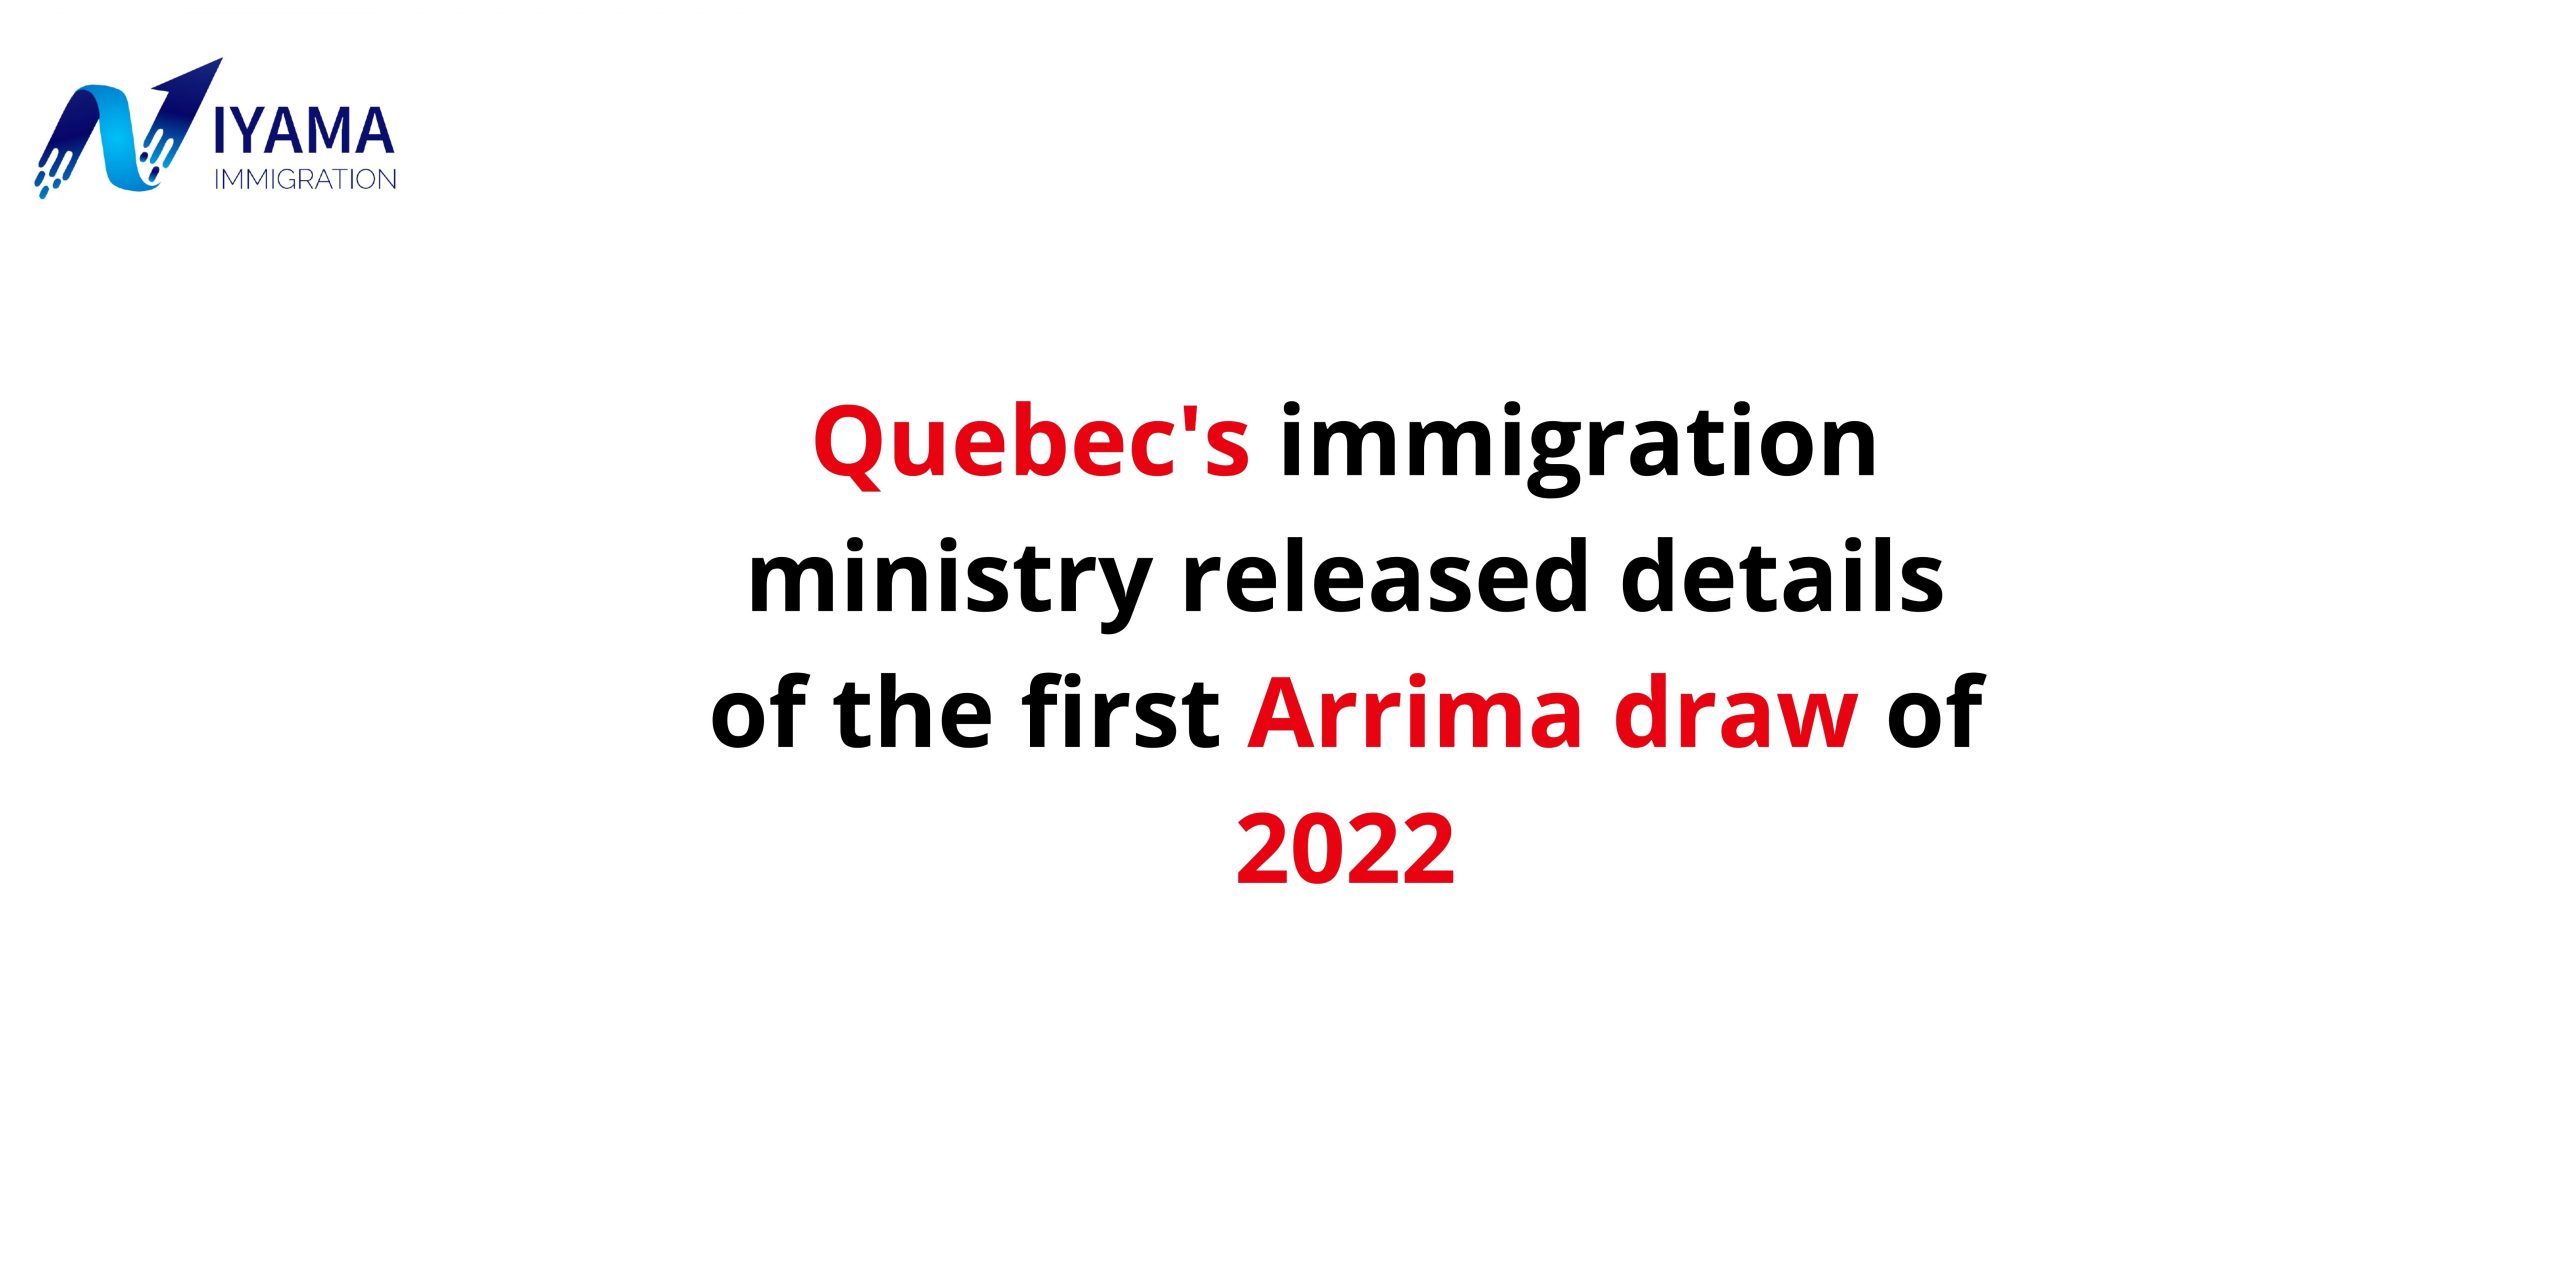 Quebec invites 512 applicants in the latest Arrima Draw of the year